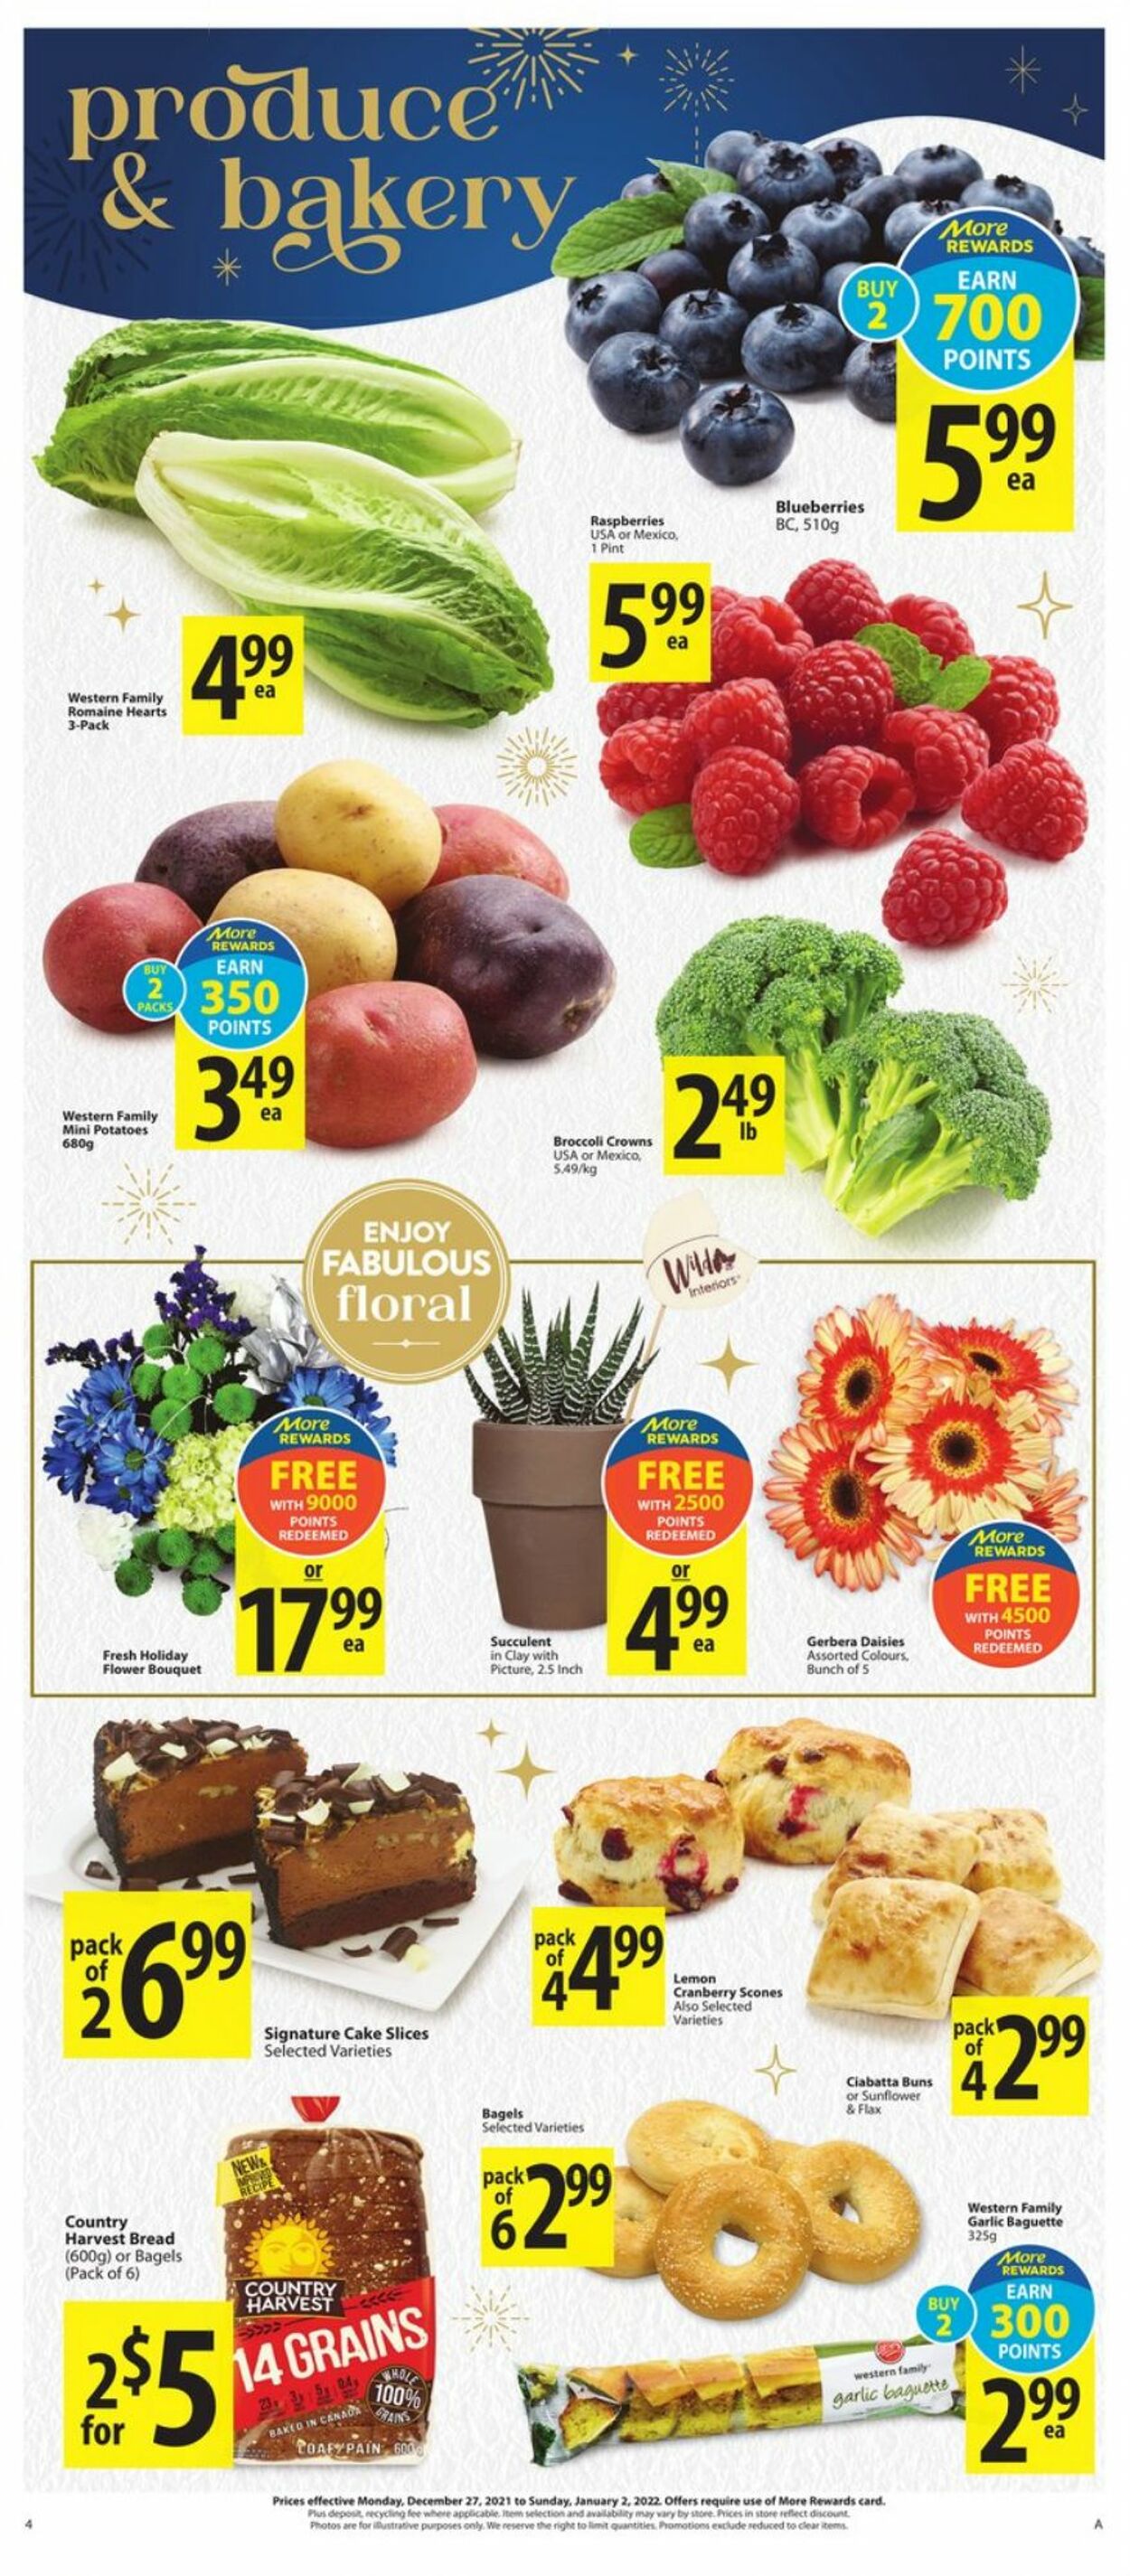 Flyer Save-On-Foods 27.12.2021 - 02.01.2022